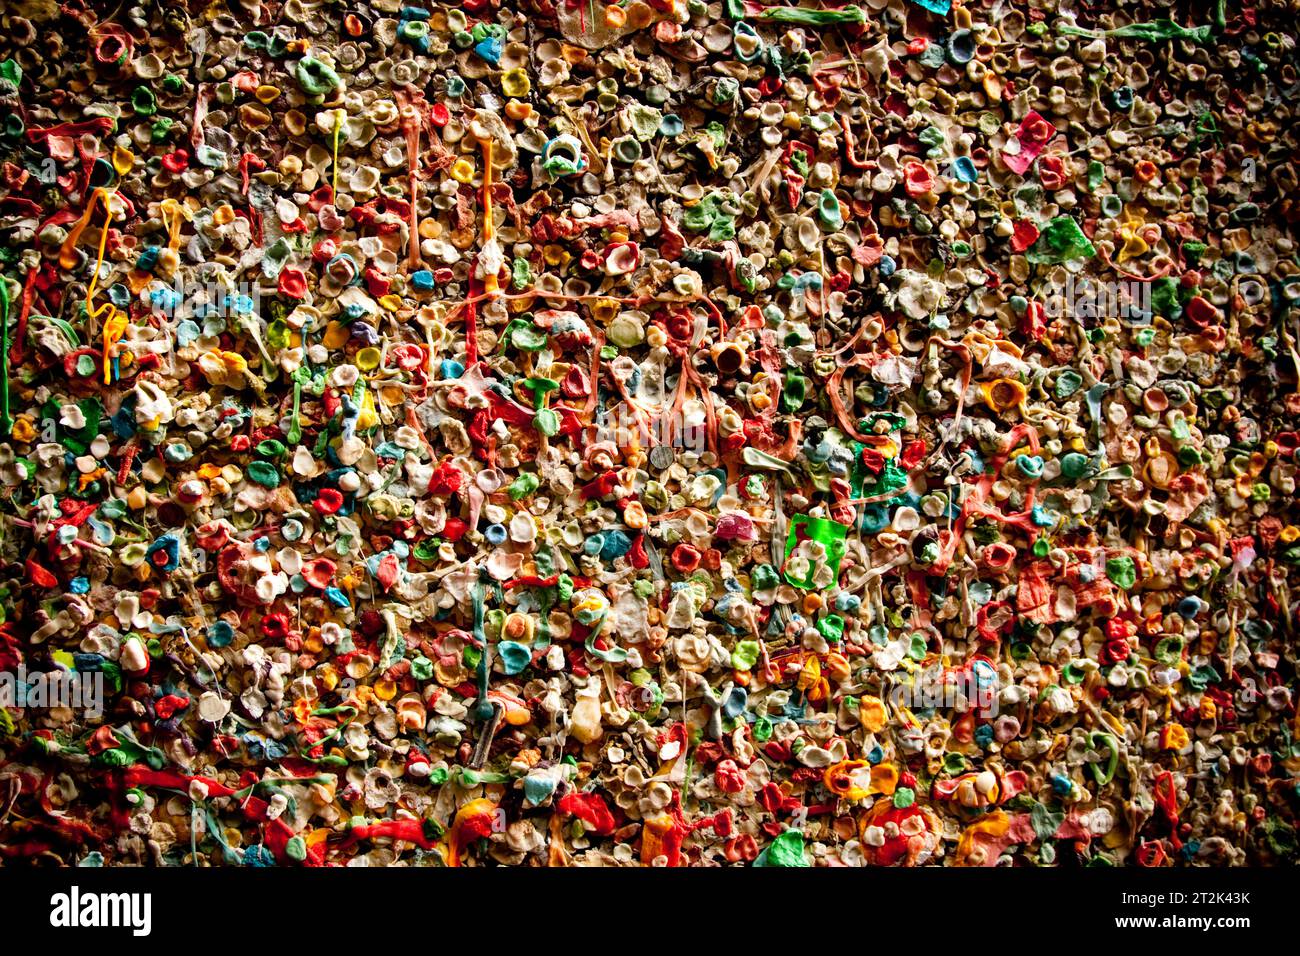 Gum wall Pike Place Market. Stock Photo